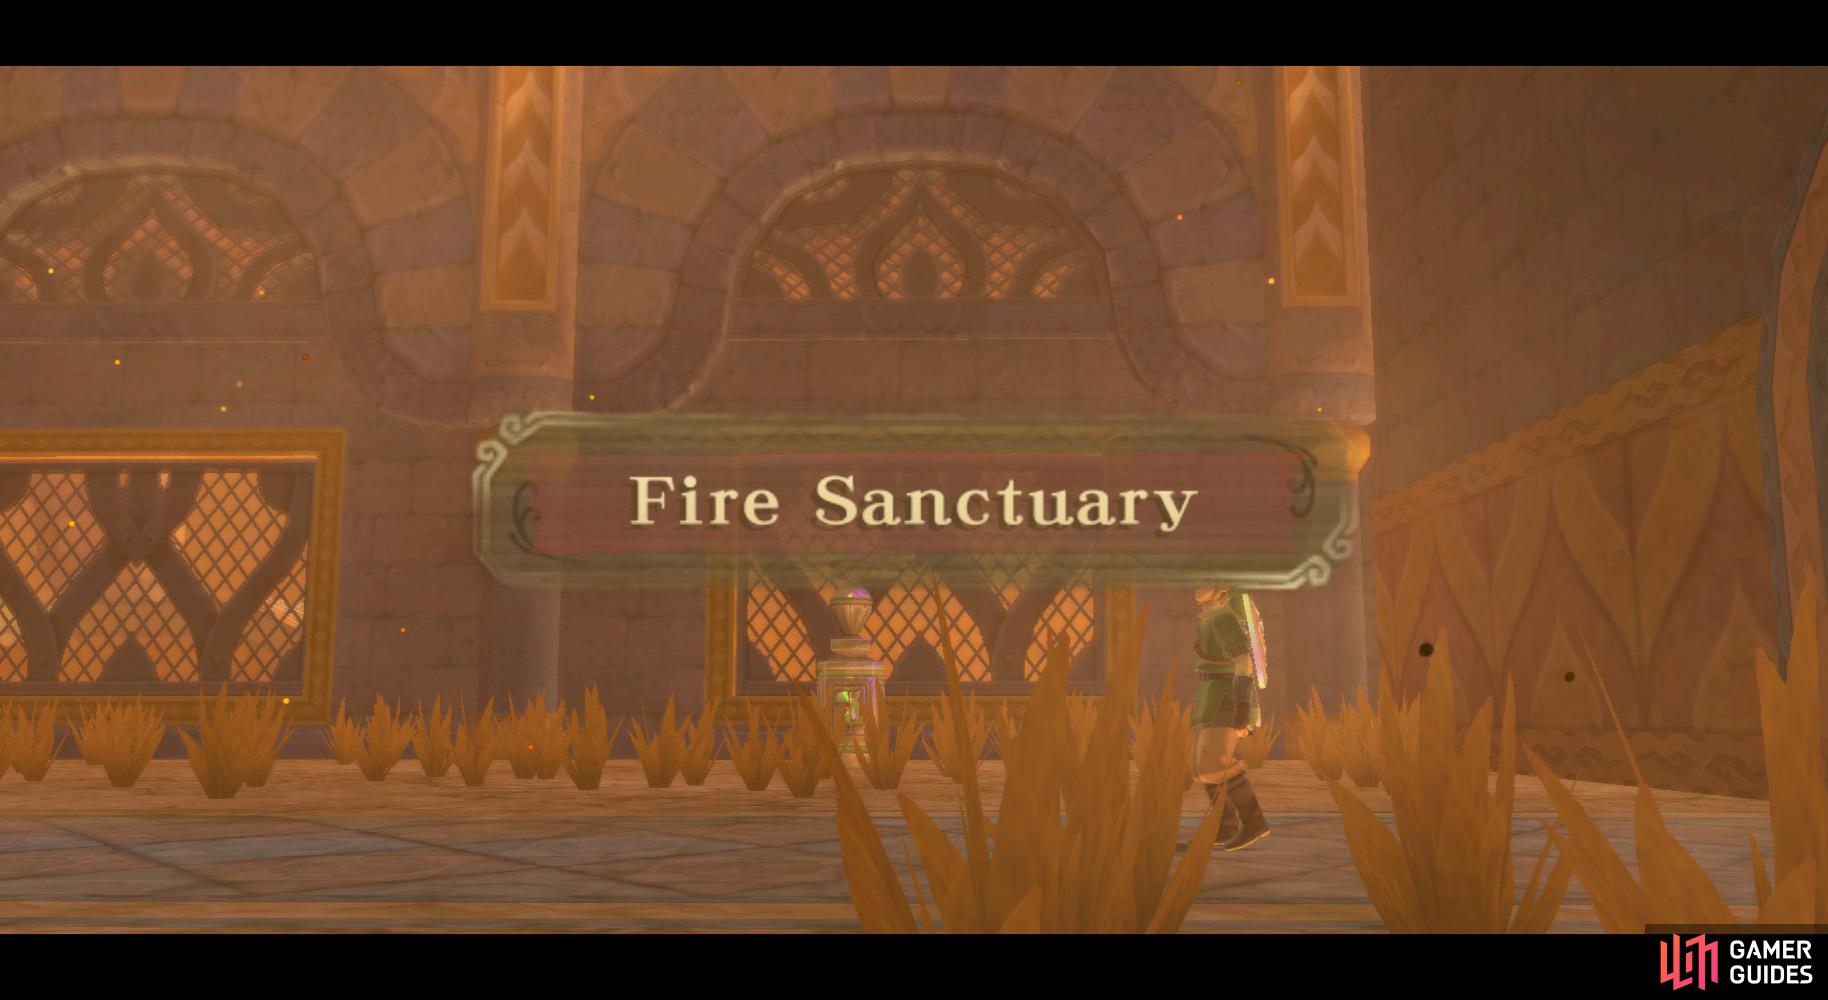 The Fire Sanctuary is another fiery dungeon.